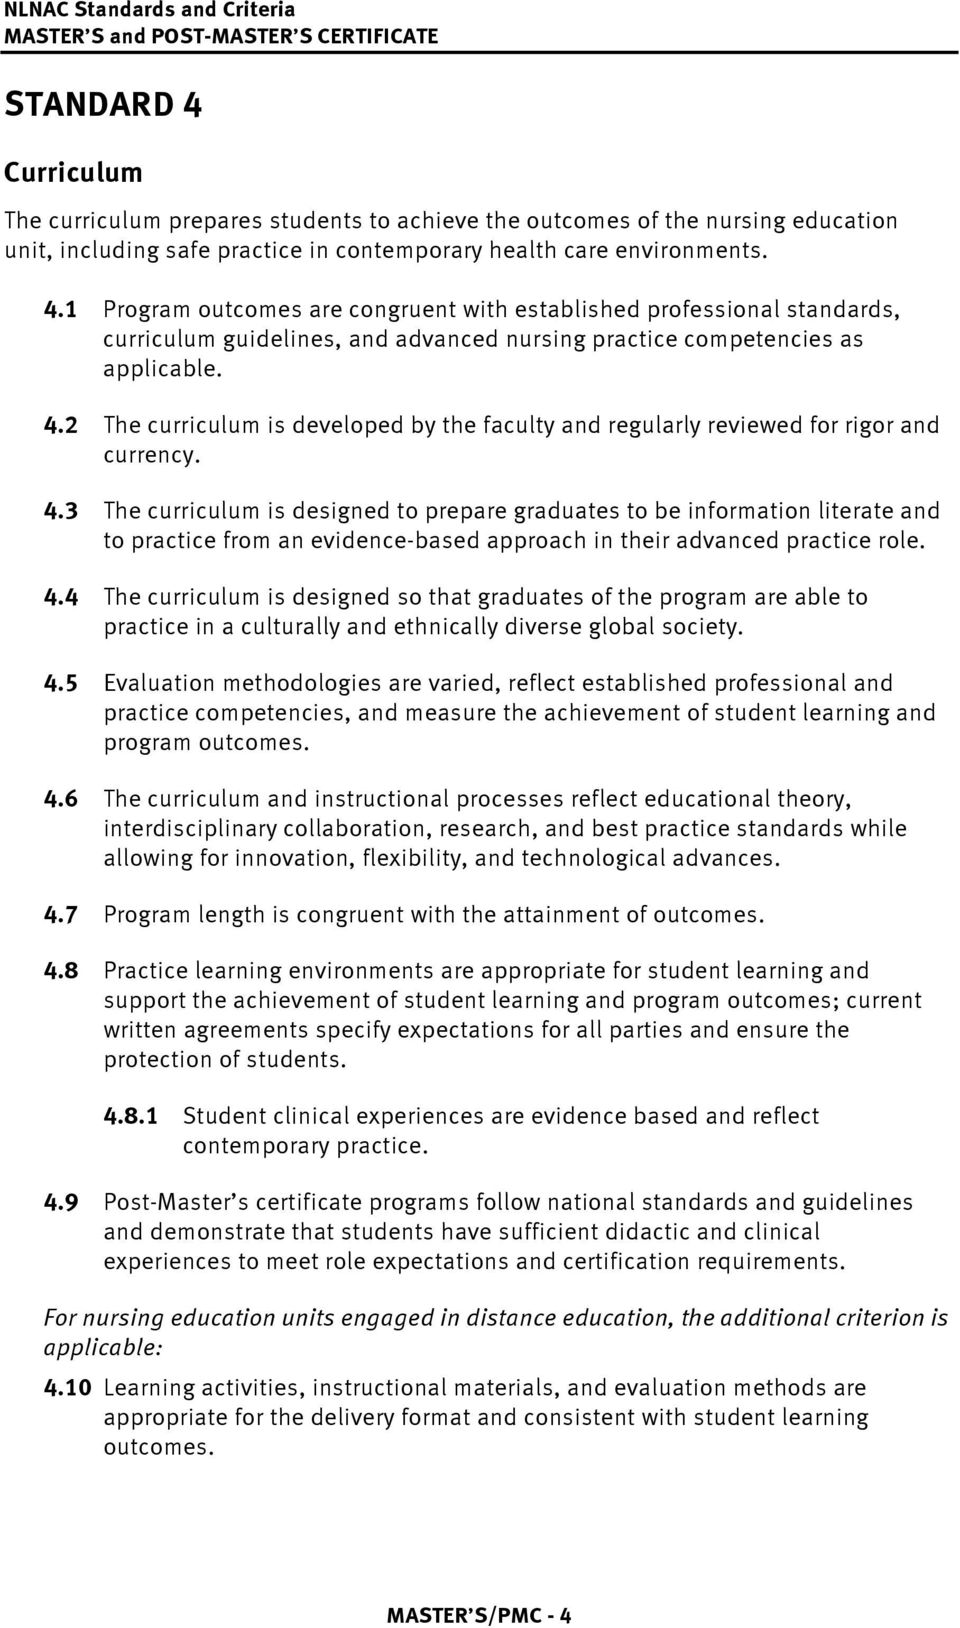 3 The curriculum is designed to prepare graduates to be information literate and to practice from an evidence-based approach in their advanced practice role. 4.